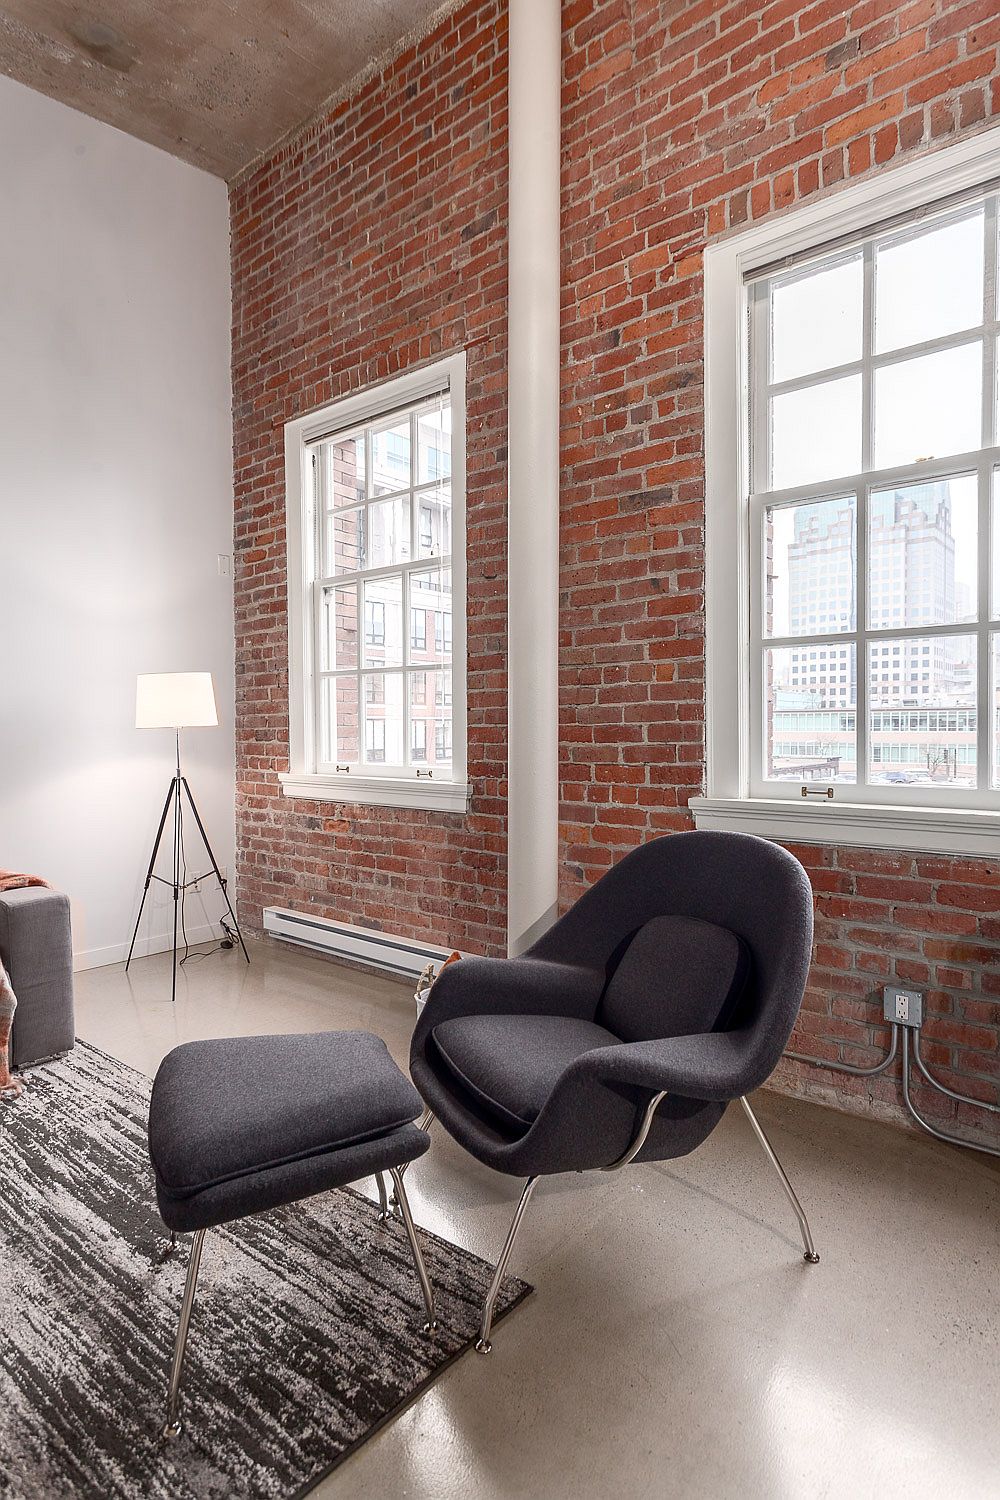 Comfy reading nook with brick wall backdrop and lots of natural light